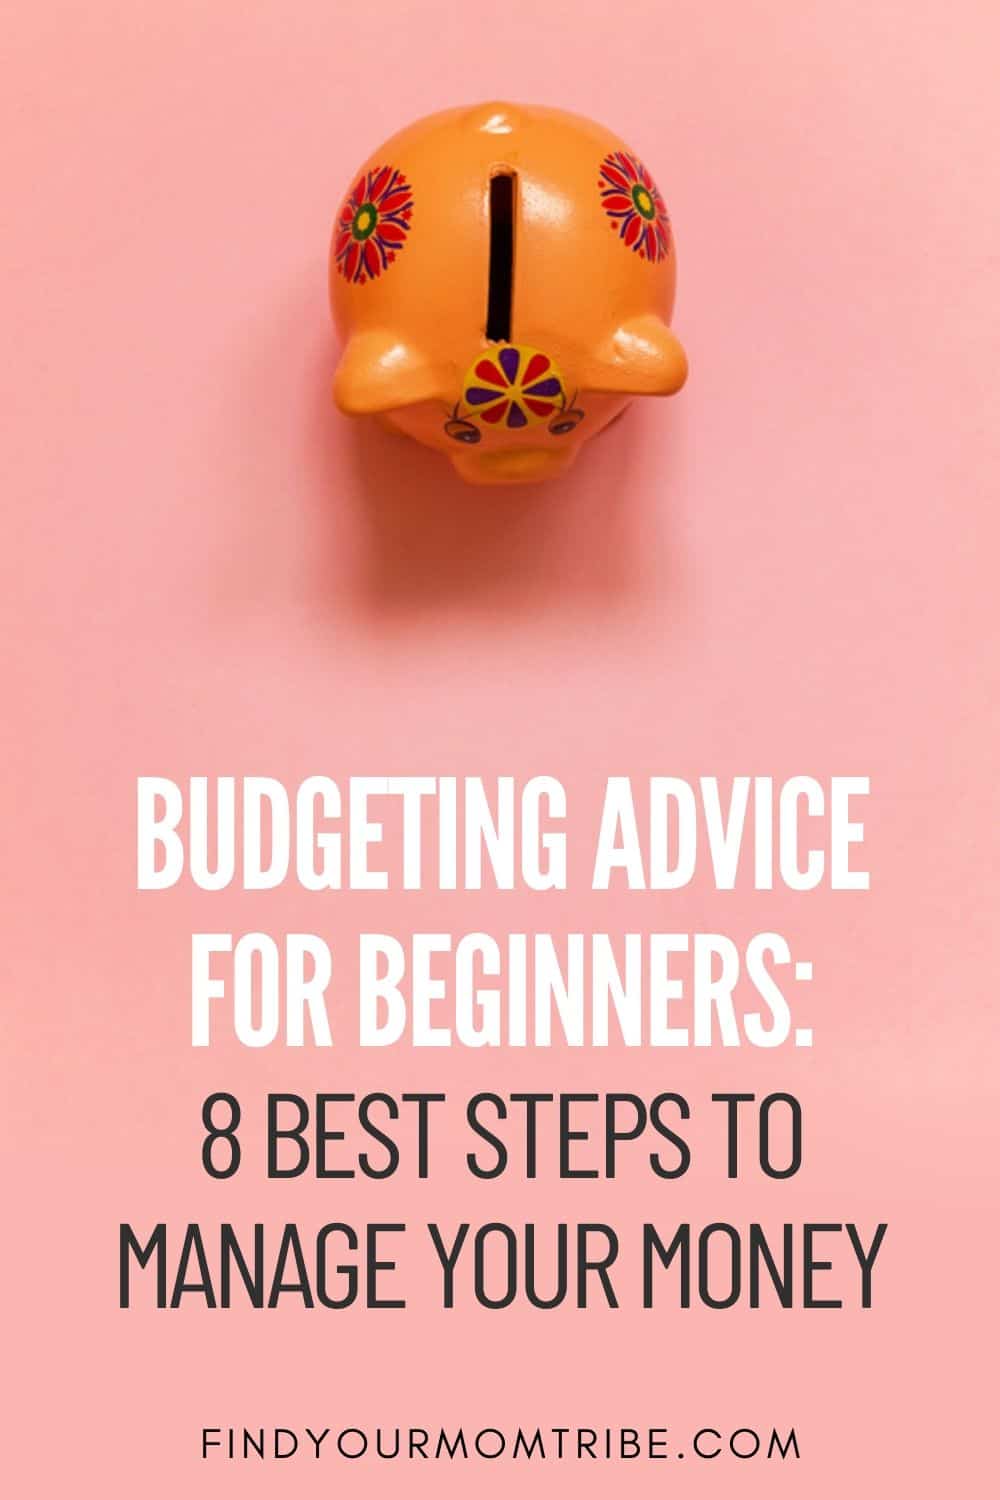 Budgeting Advice For Beginners_ 8 Best Steps To Manage Your Money Pinterest